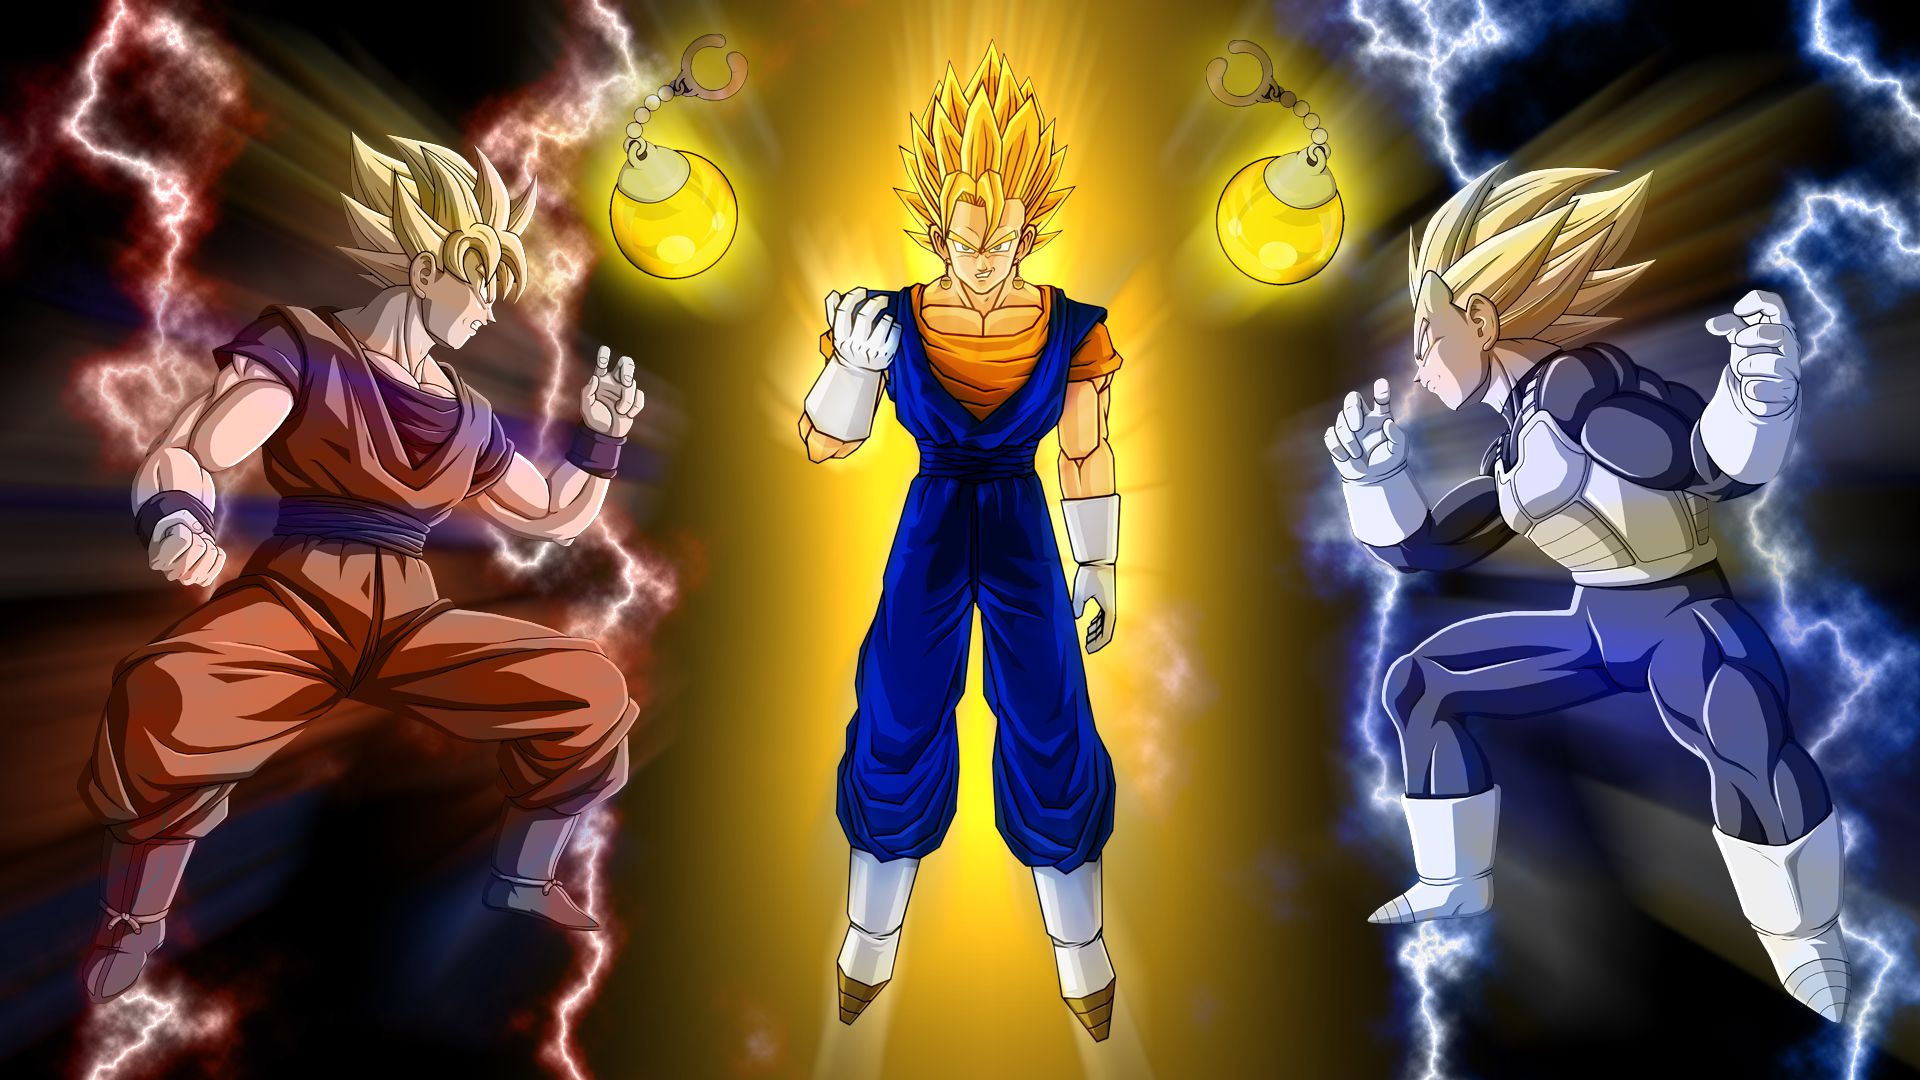 Free download Top Dragon Ball Z Hd Wallpapers For Pc [1920x1080